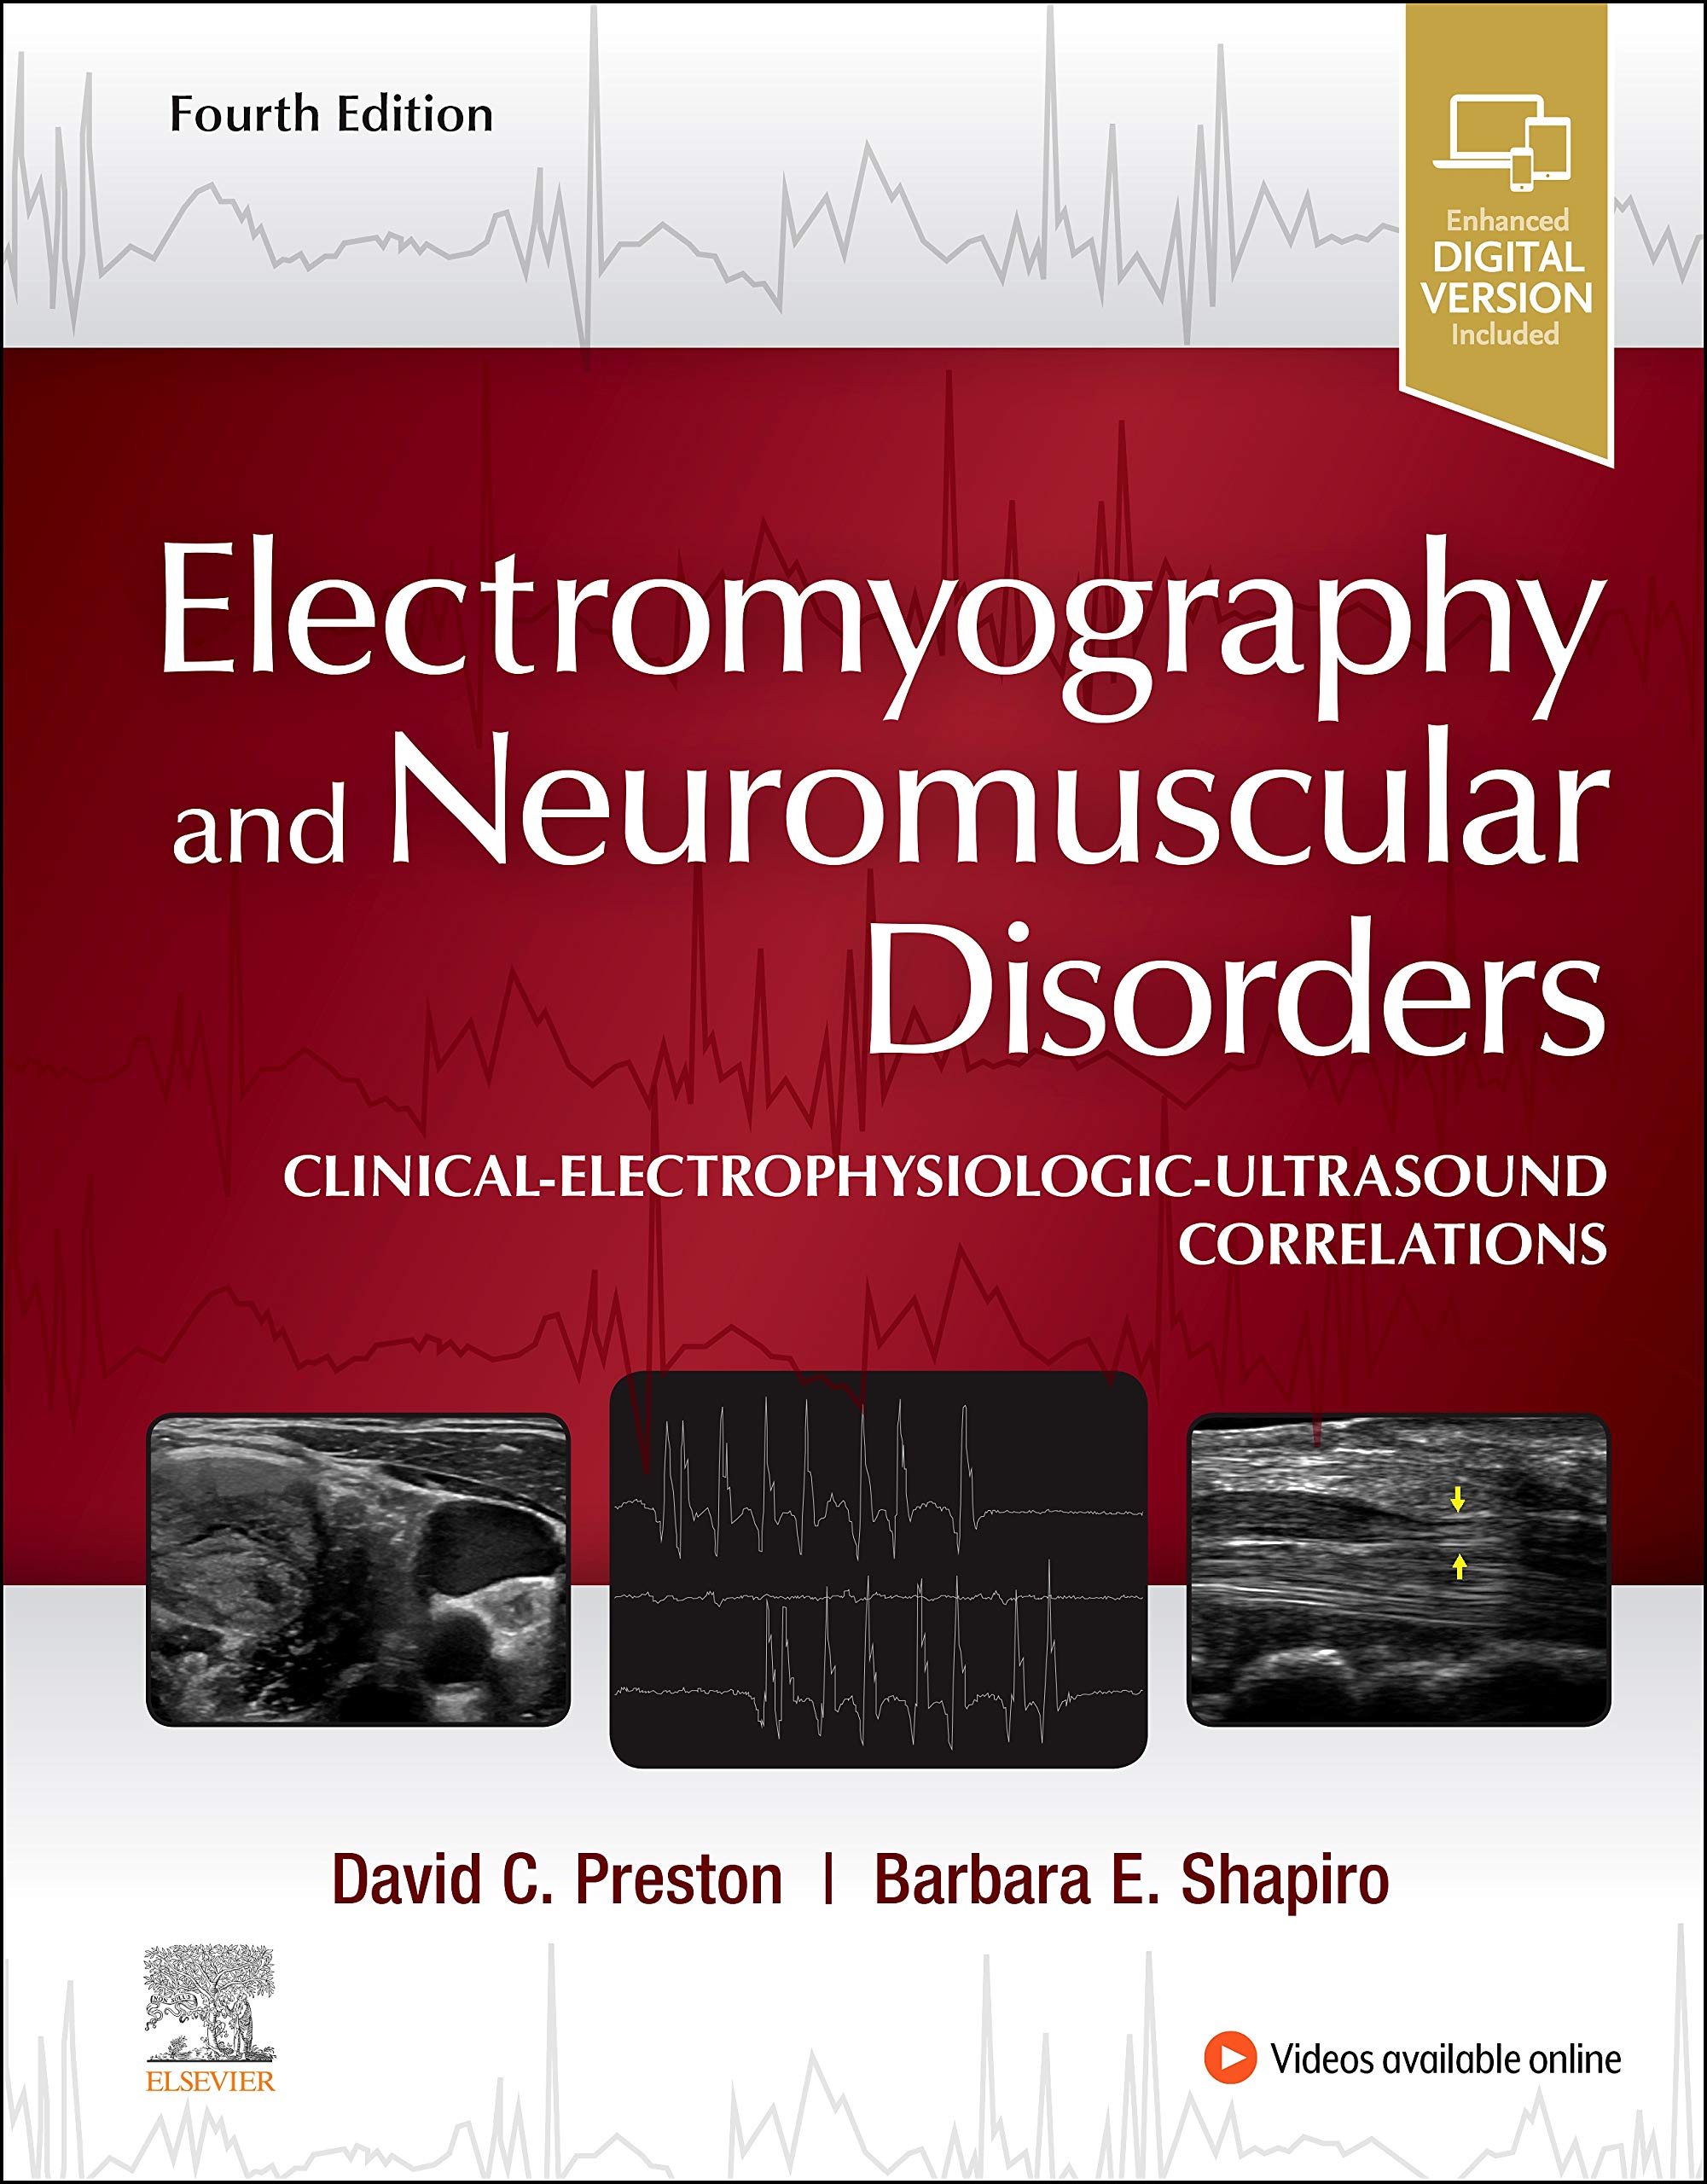 Electromyography And Neuromuscular Disorders: Clinical-Electrophysiologic-Ultrasound Correlations 4Ed (Hb)